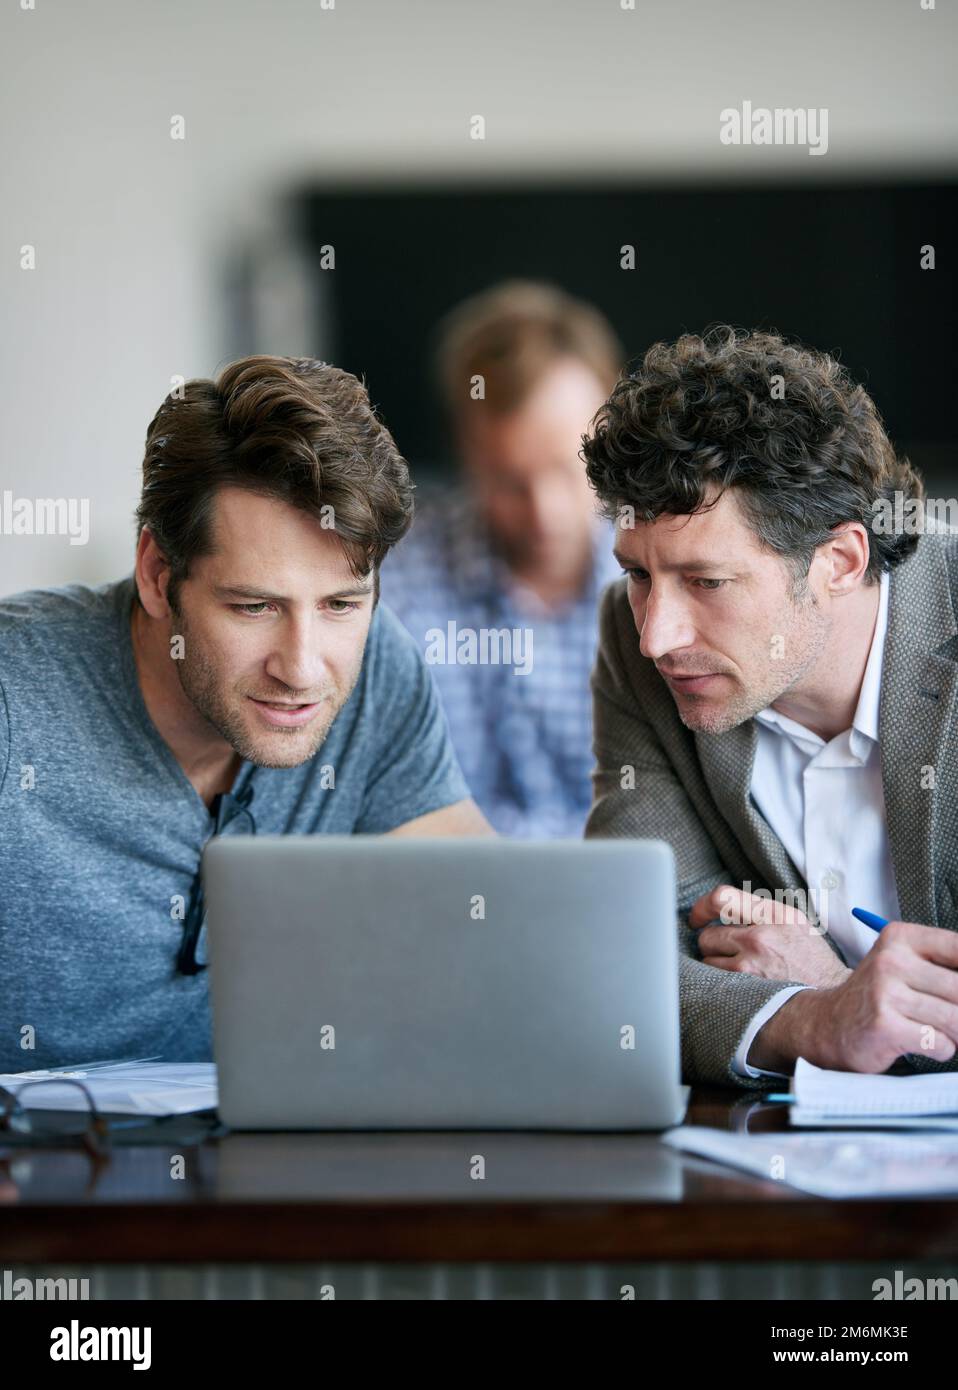 Am I seeing this correctly. two businessmen looking over some work with their colleague in the background. Stock Photo